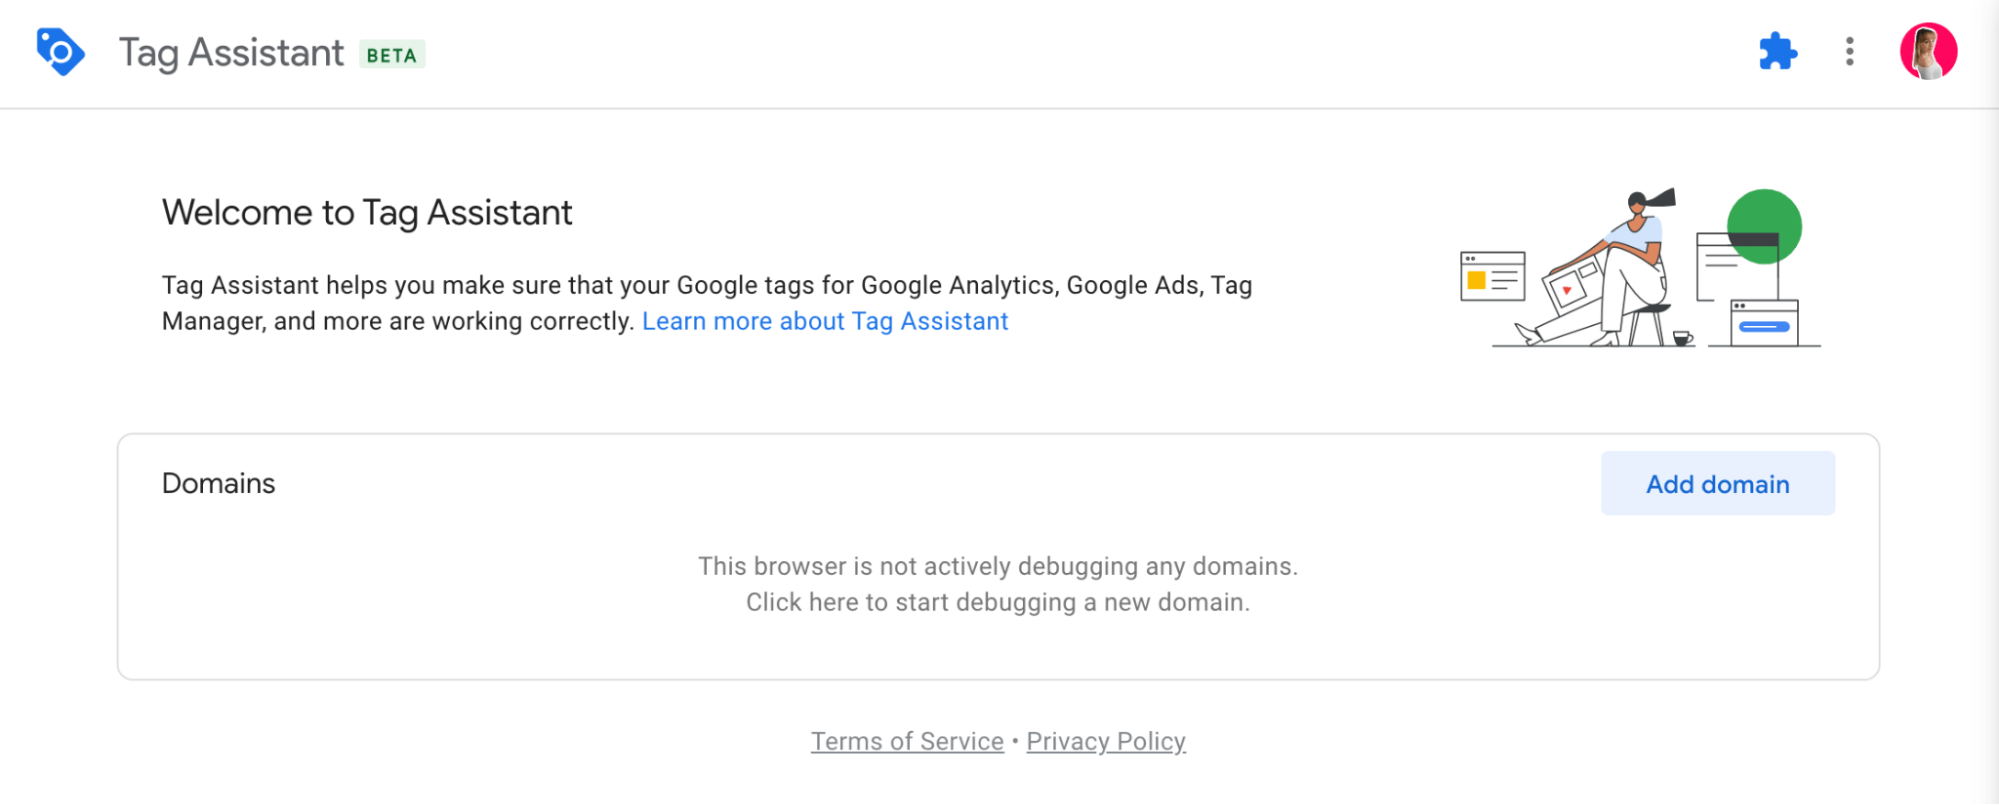 Screenshot of Google Tag Assistant where you can enter the URL of the domain you want to check for script execution issues when Google Analytics isn’t showing conversions data.